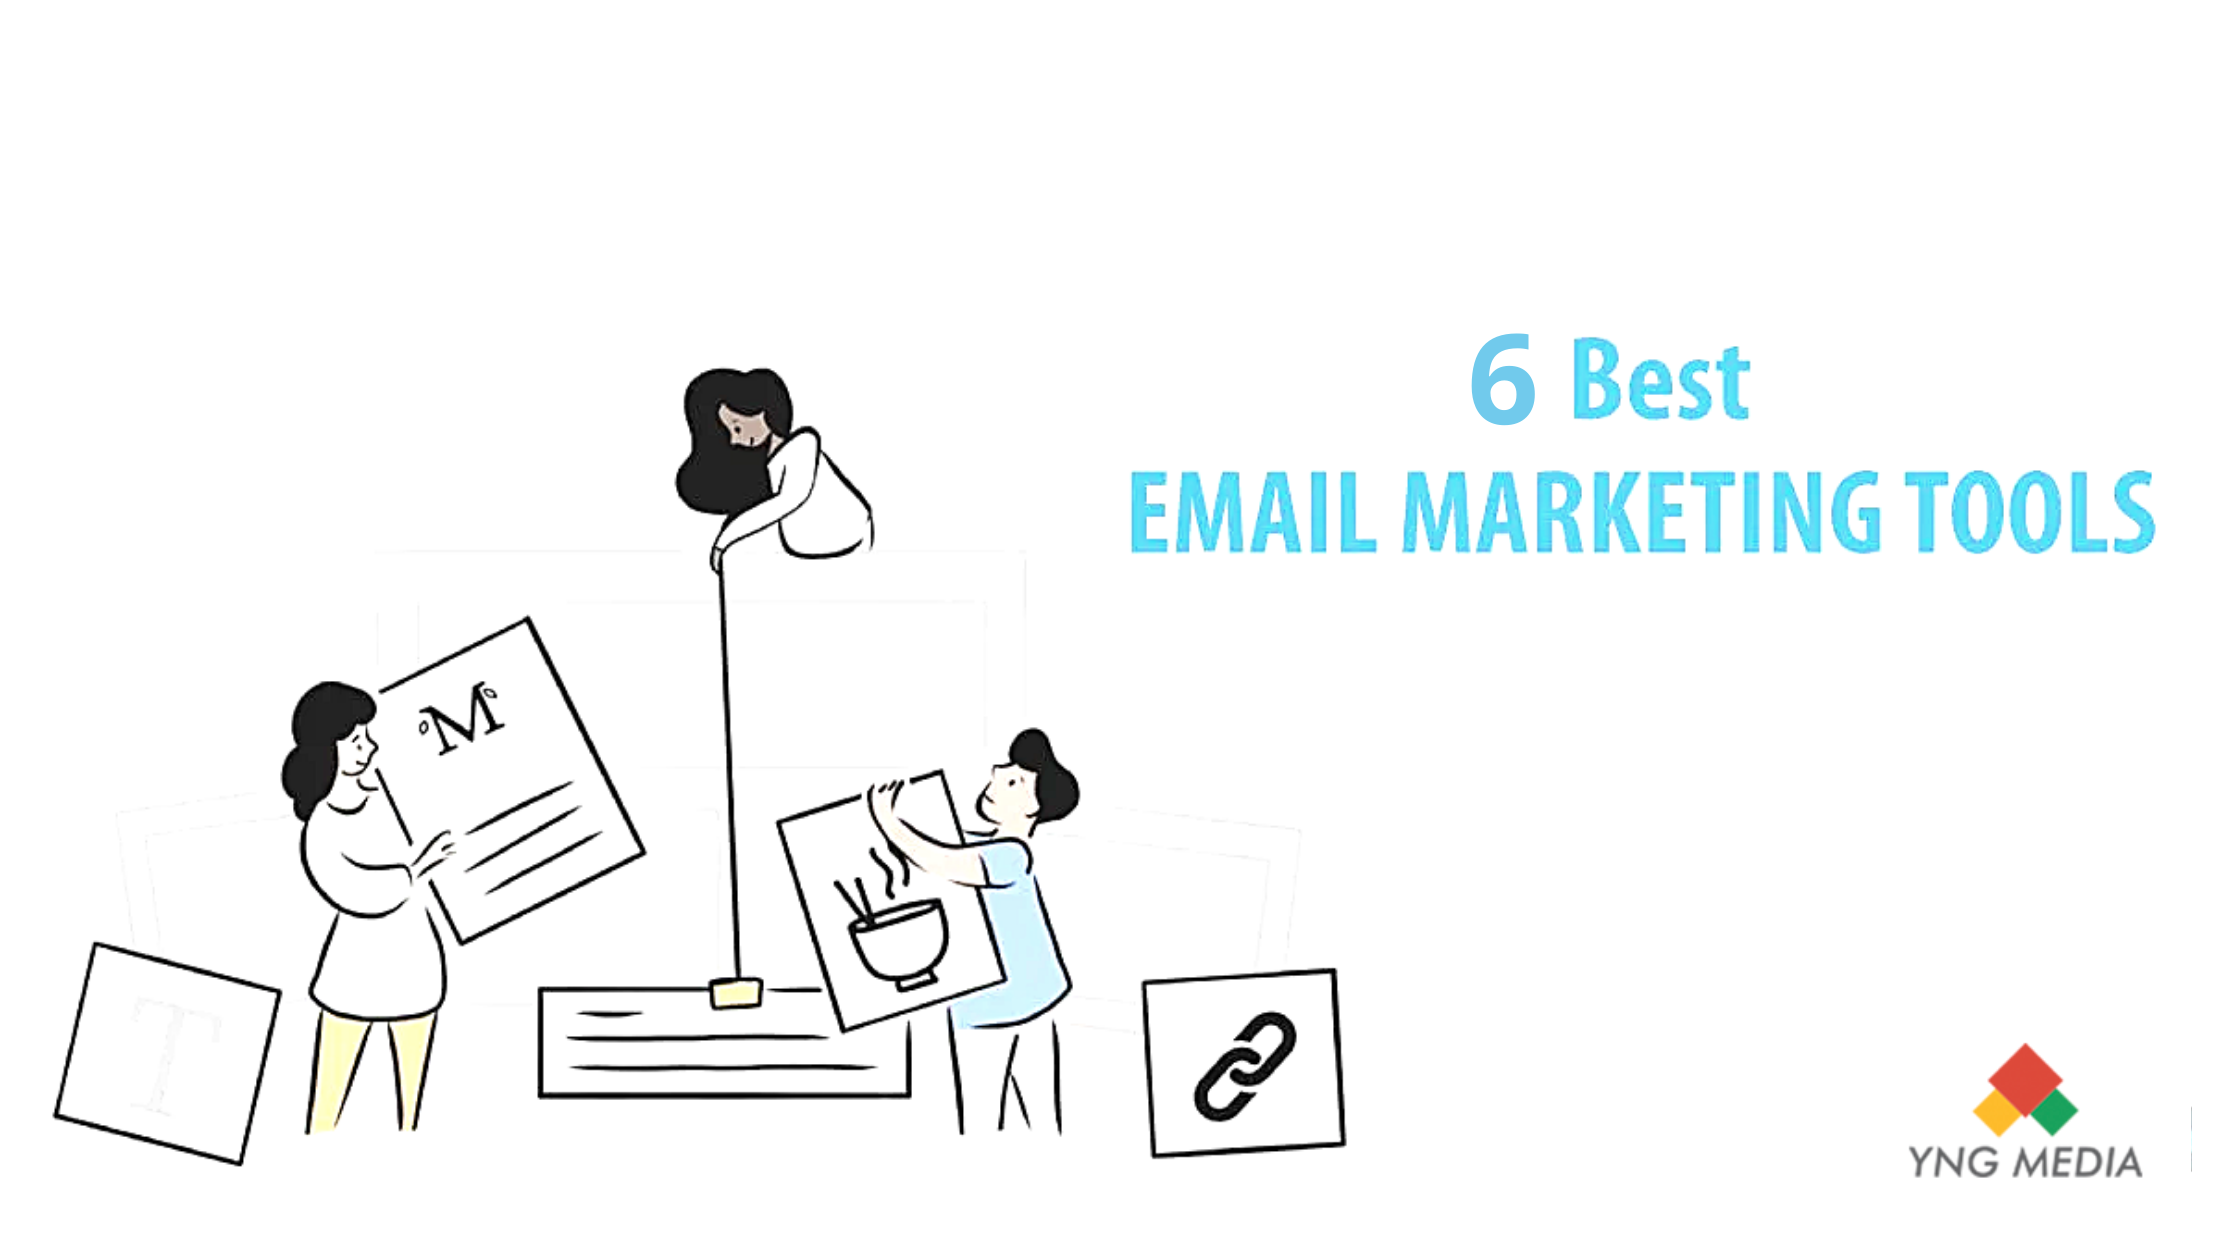 6 Email Marketing tools 2021